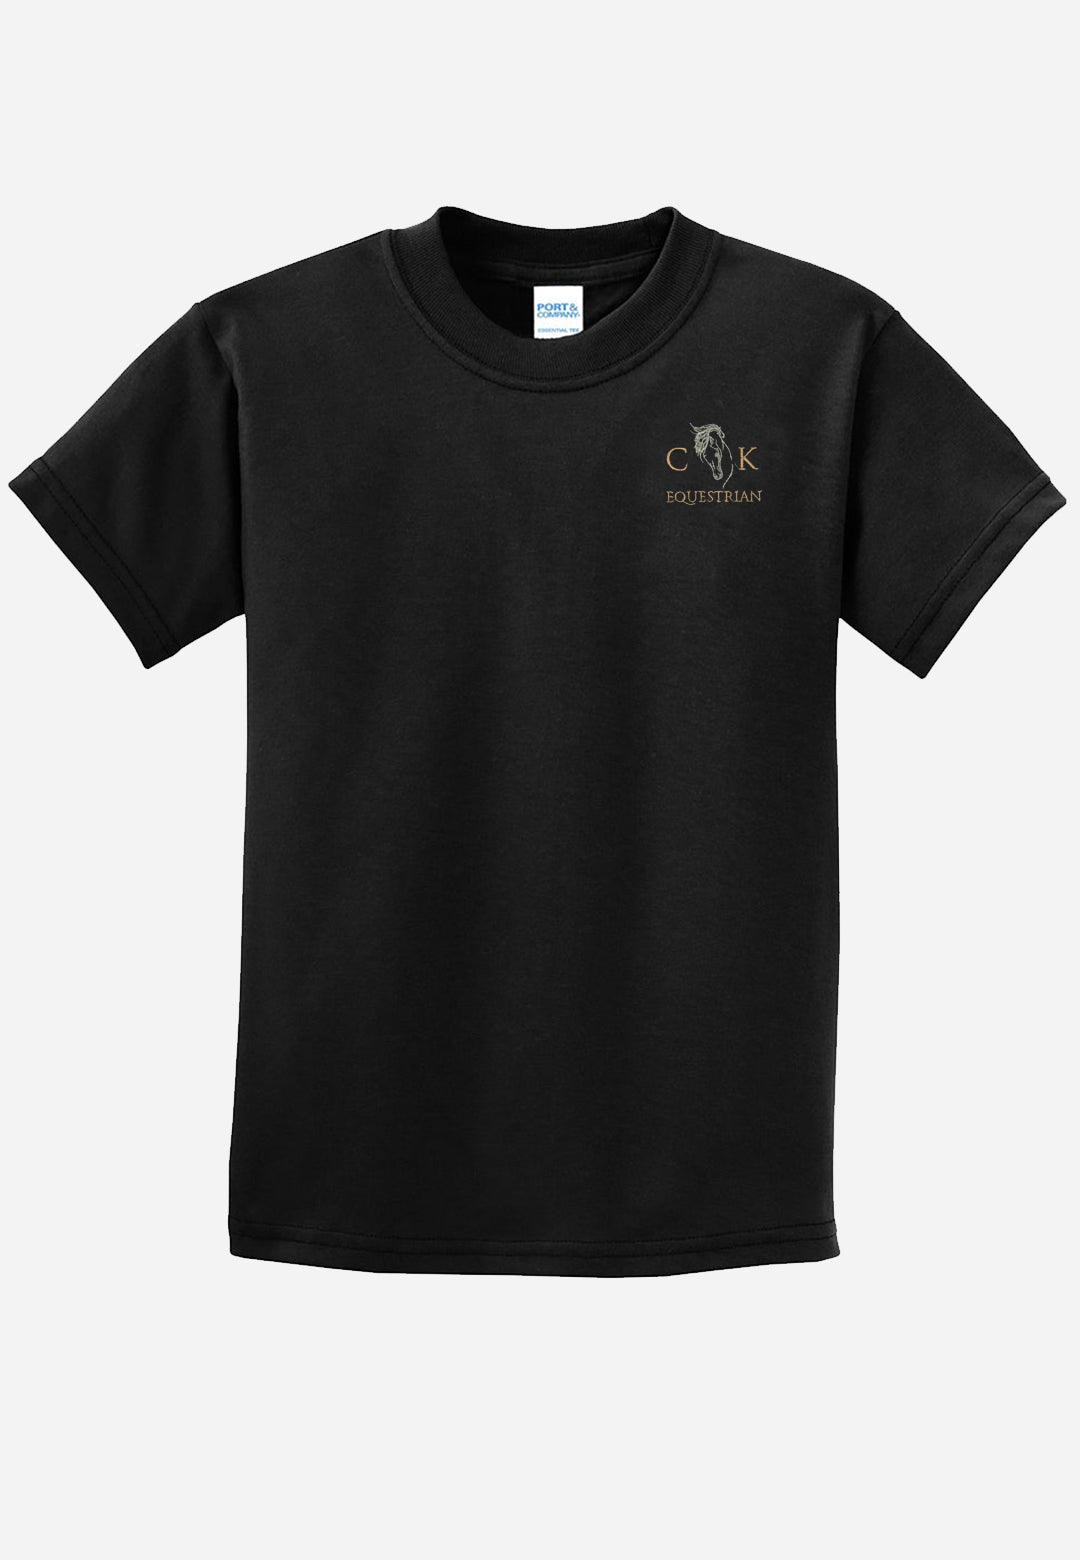 CK Equestrian Port & Company® Essential Tee - Youth